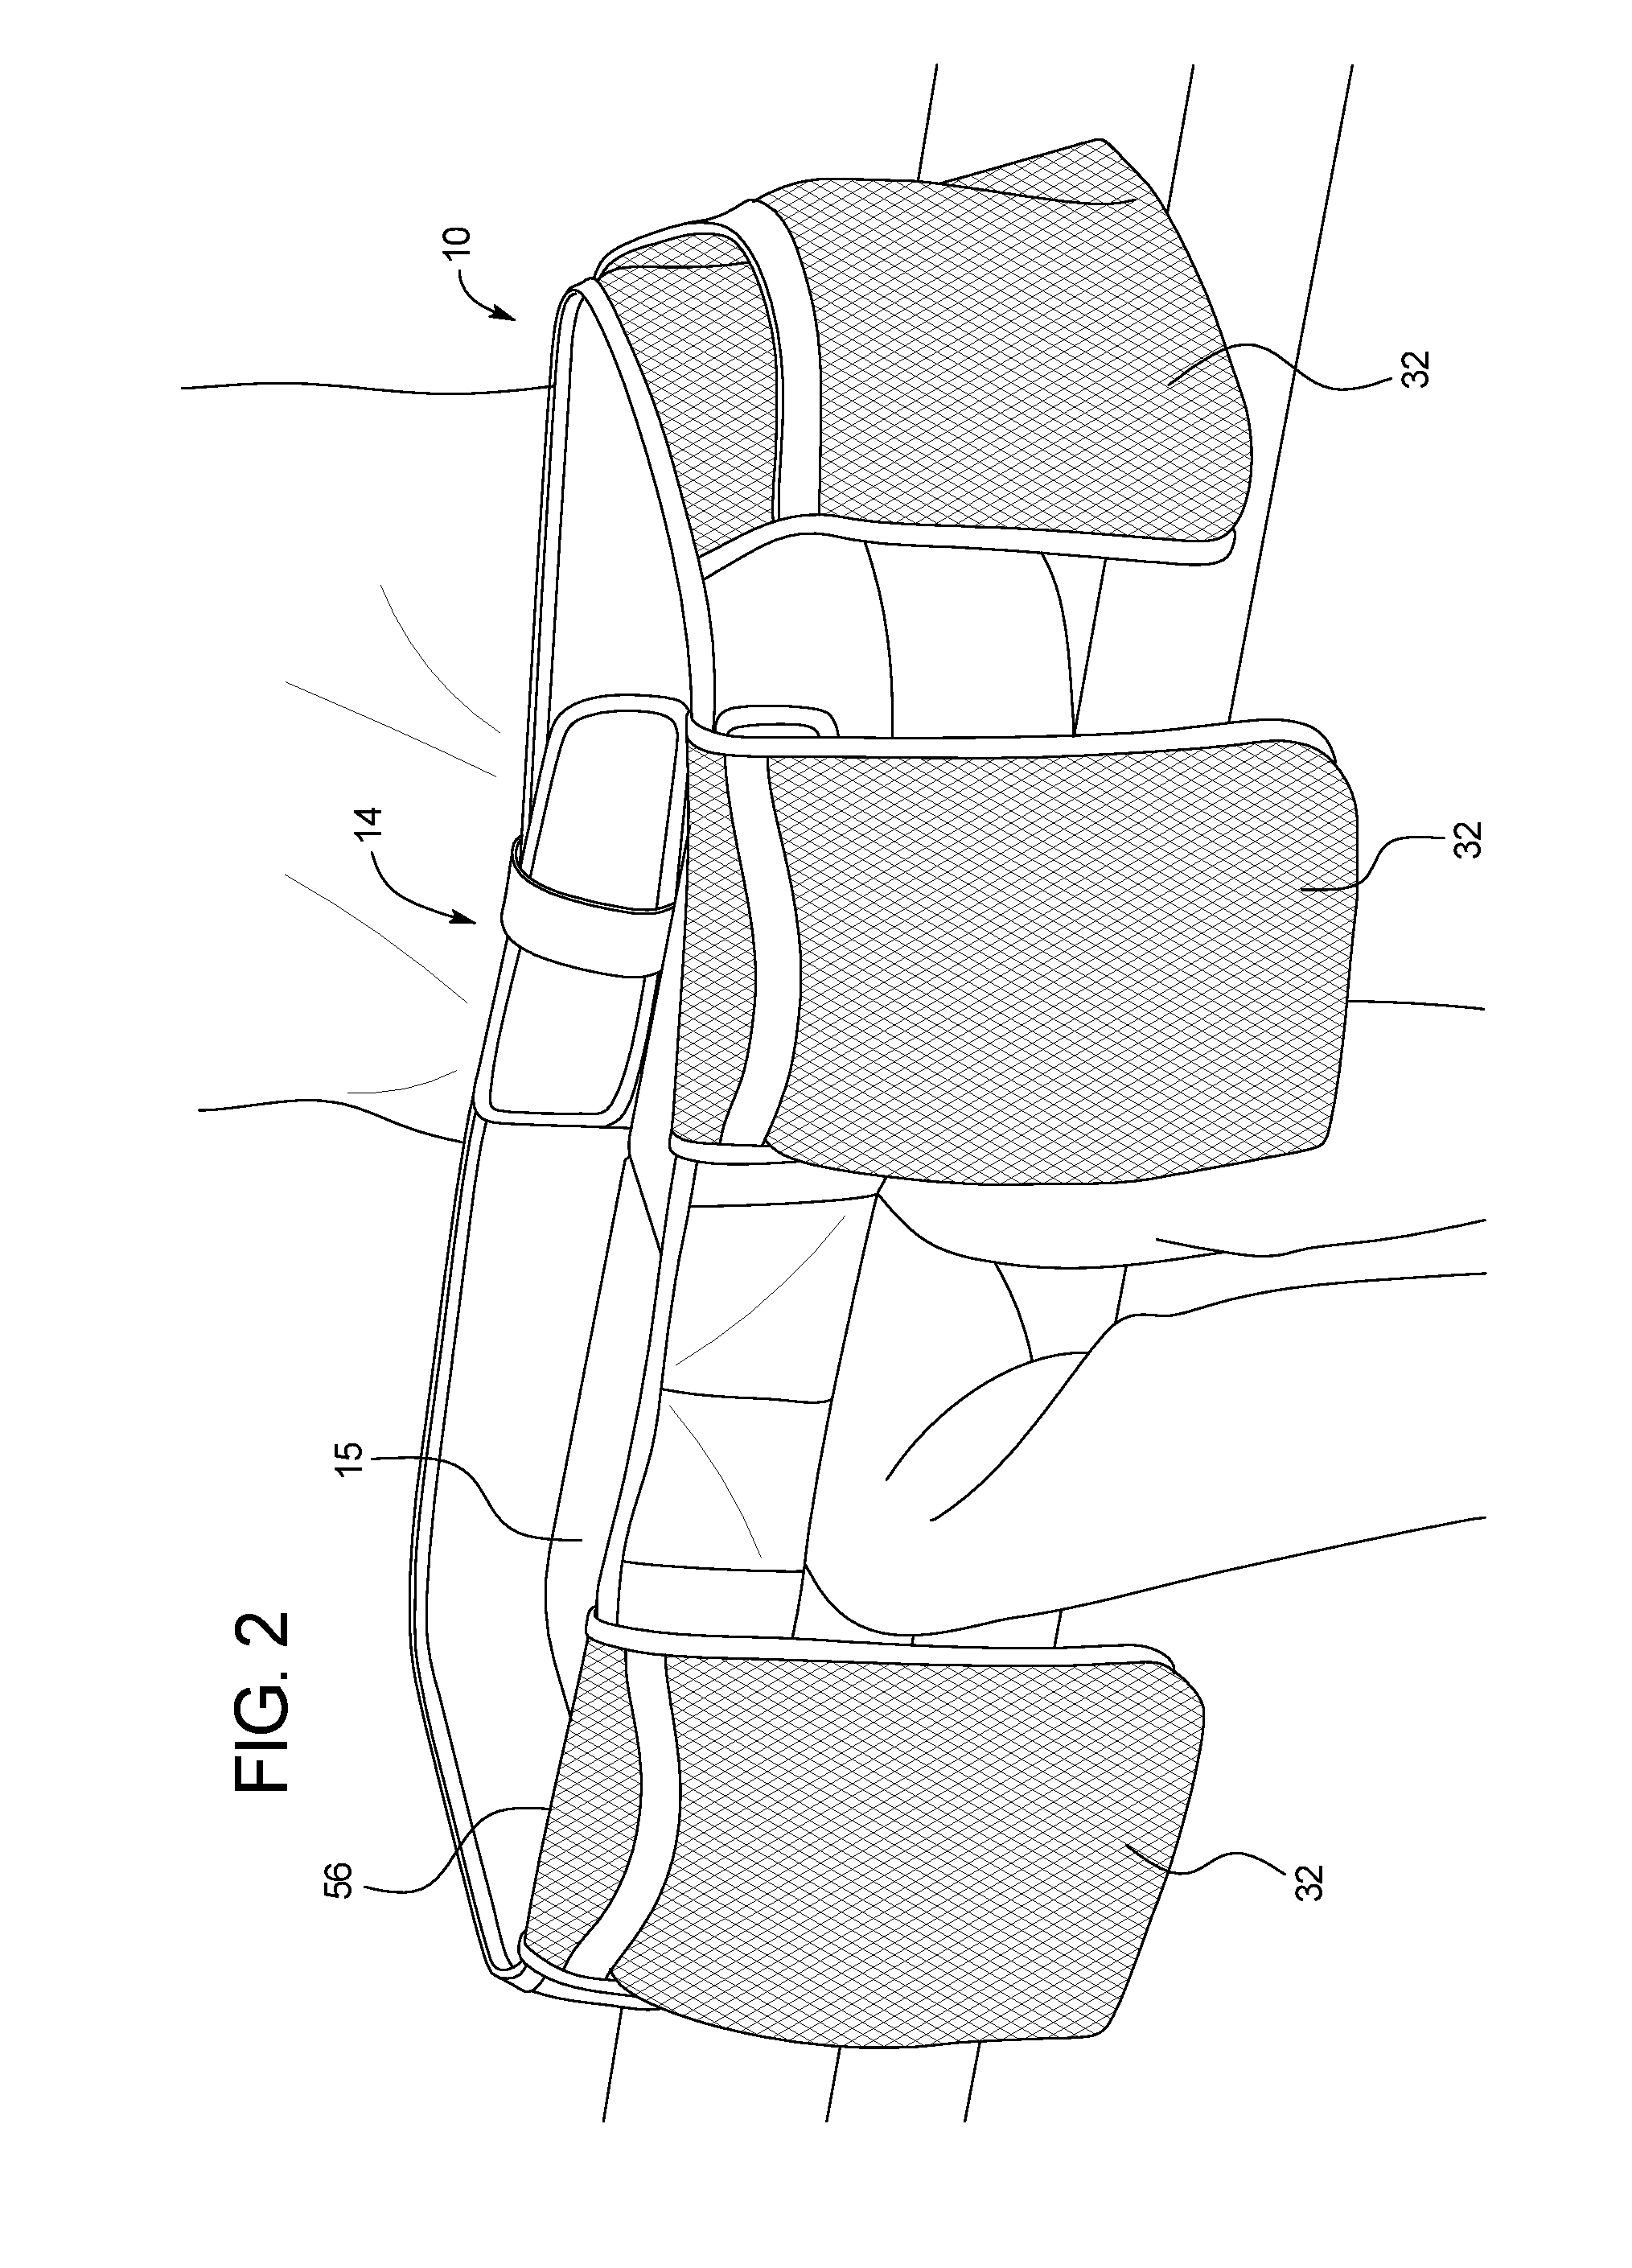 Method of Using a Convertible Diaper Changing Bag